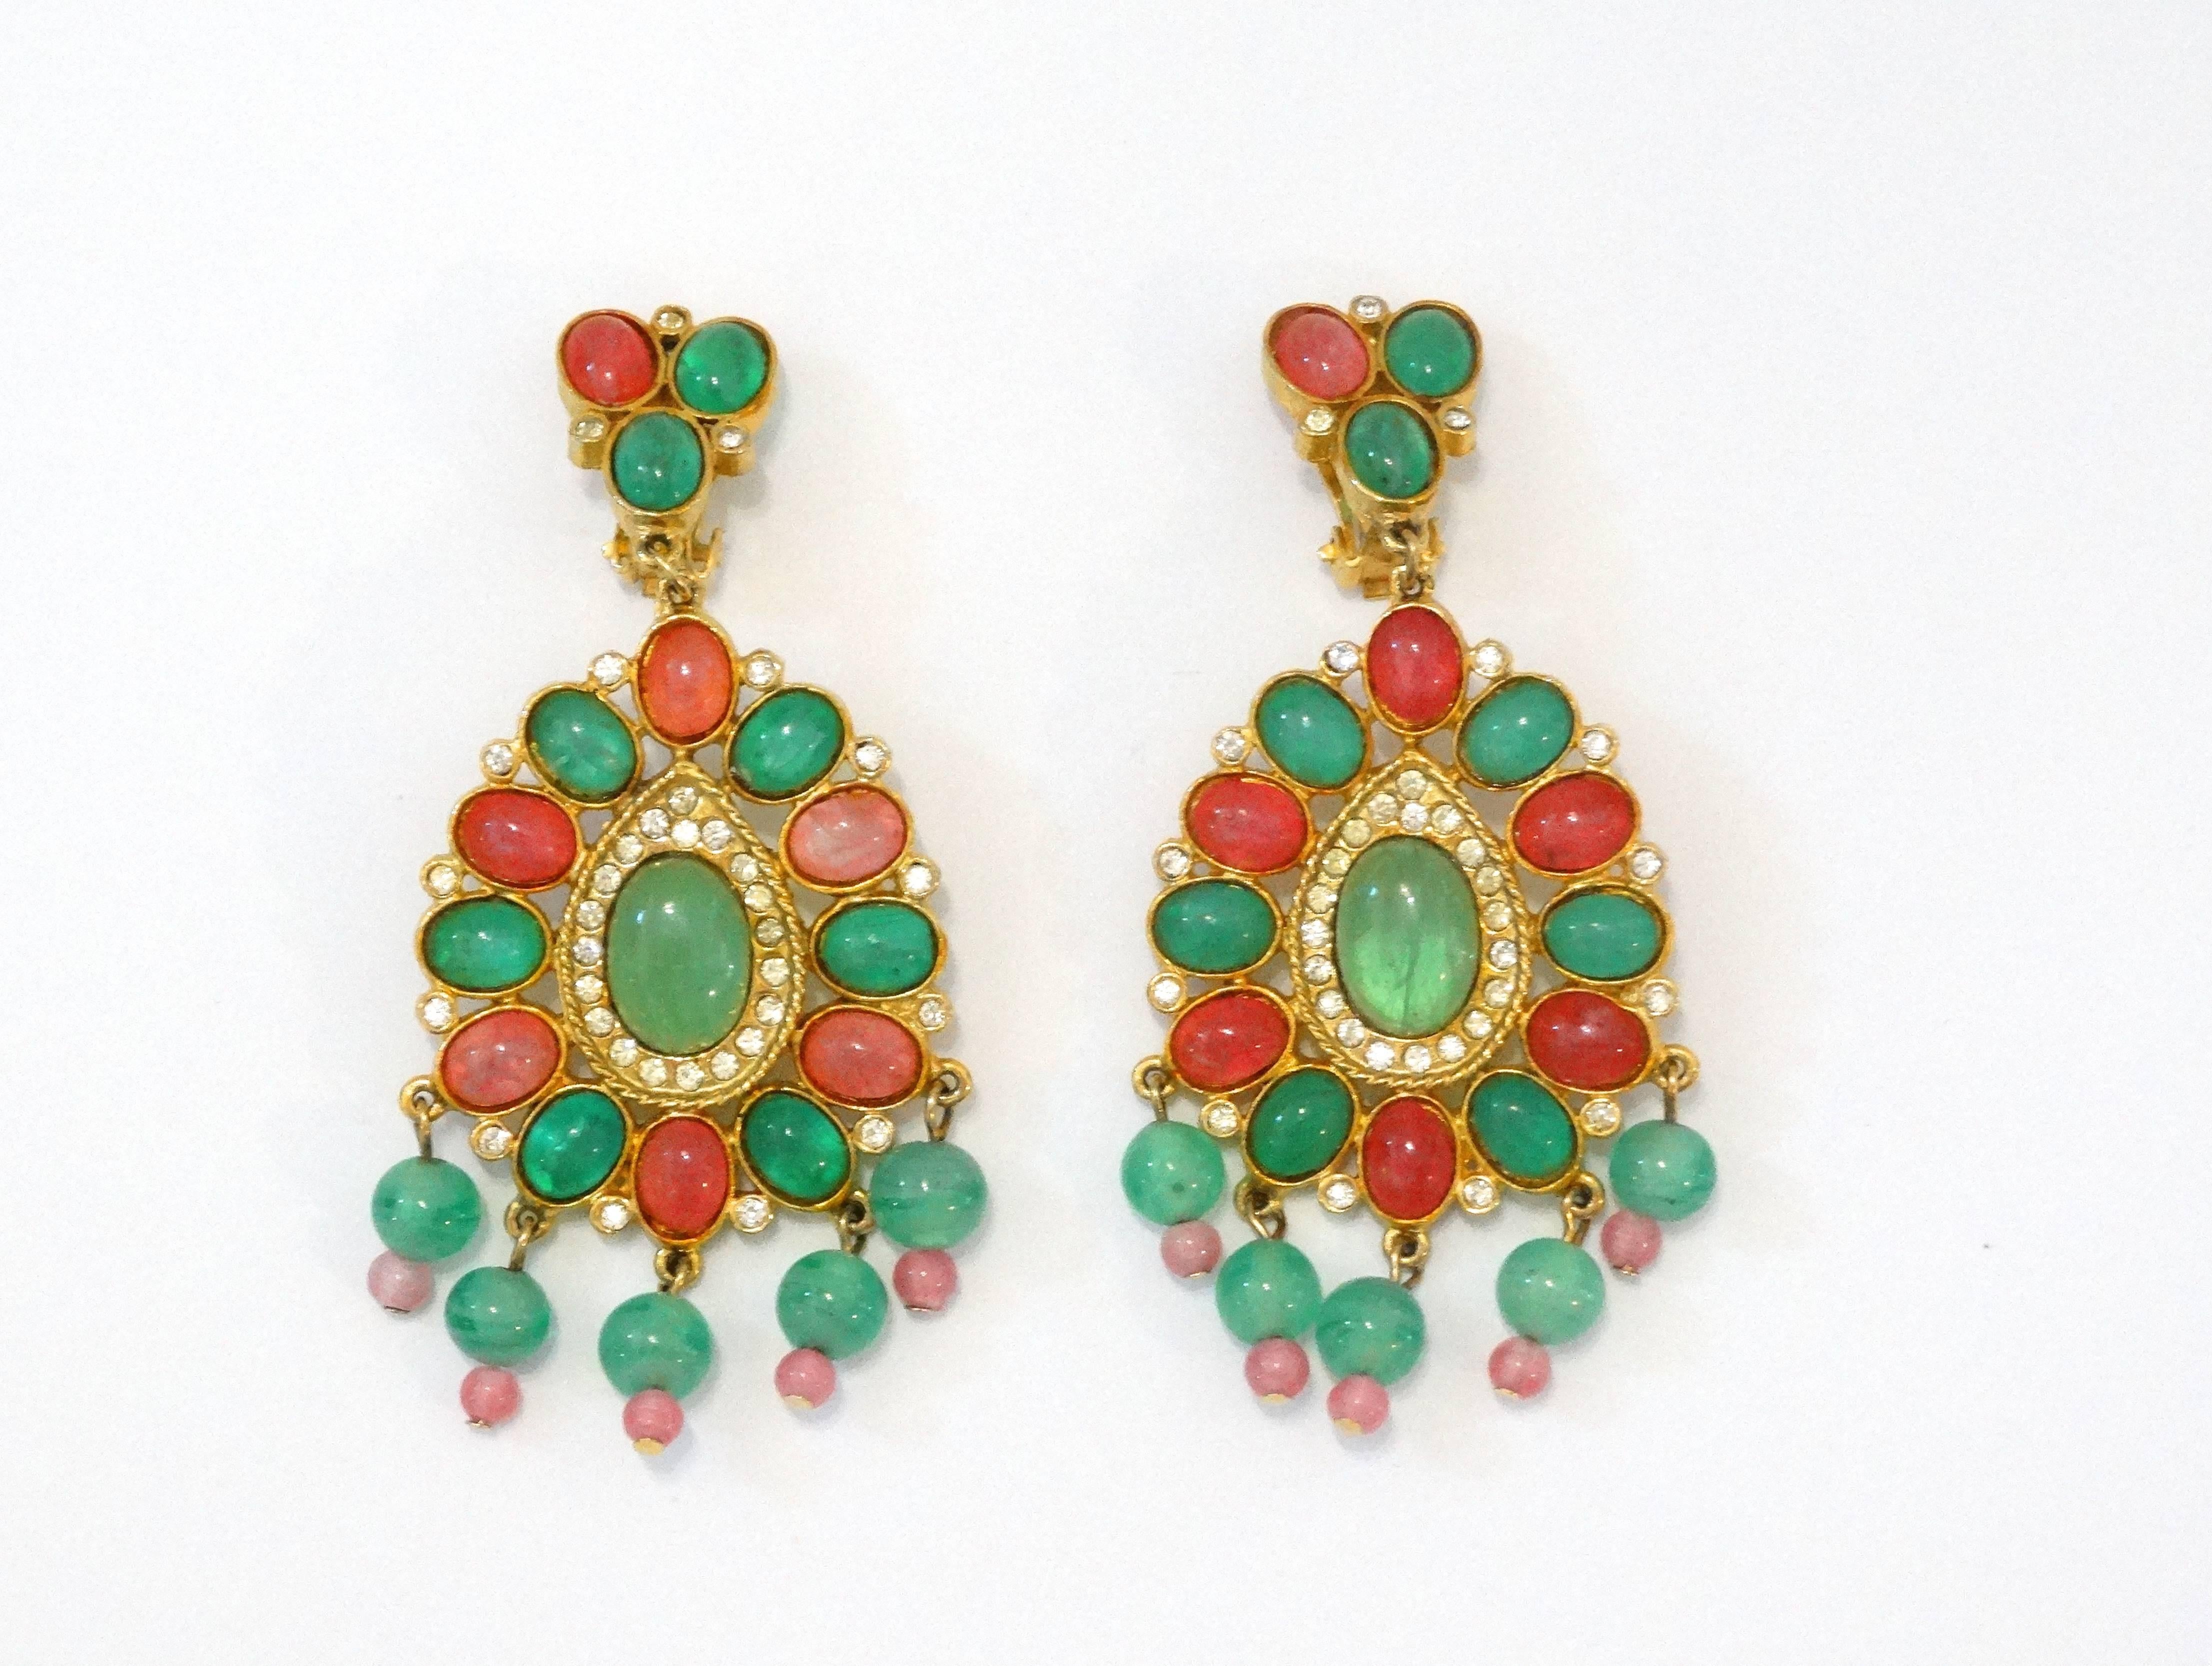 Incredible pair of 1960s chandelier style earrings! Pink and green glass beads and gems accented with crystalline rhinestones. Plated in 18k gold. Clip on backs. These earrings where purchased from Magdolna 